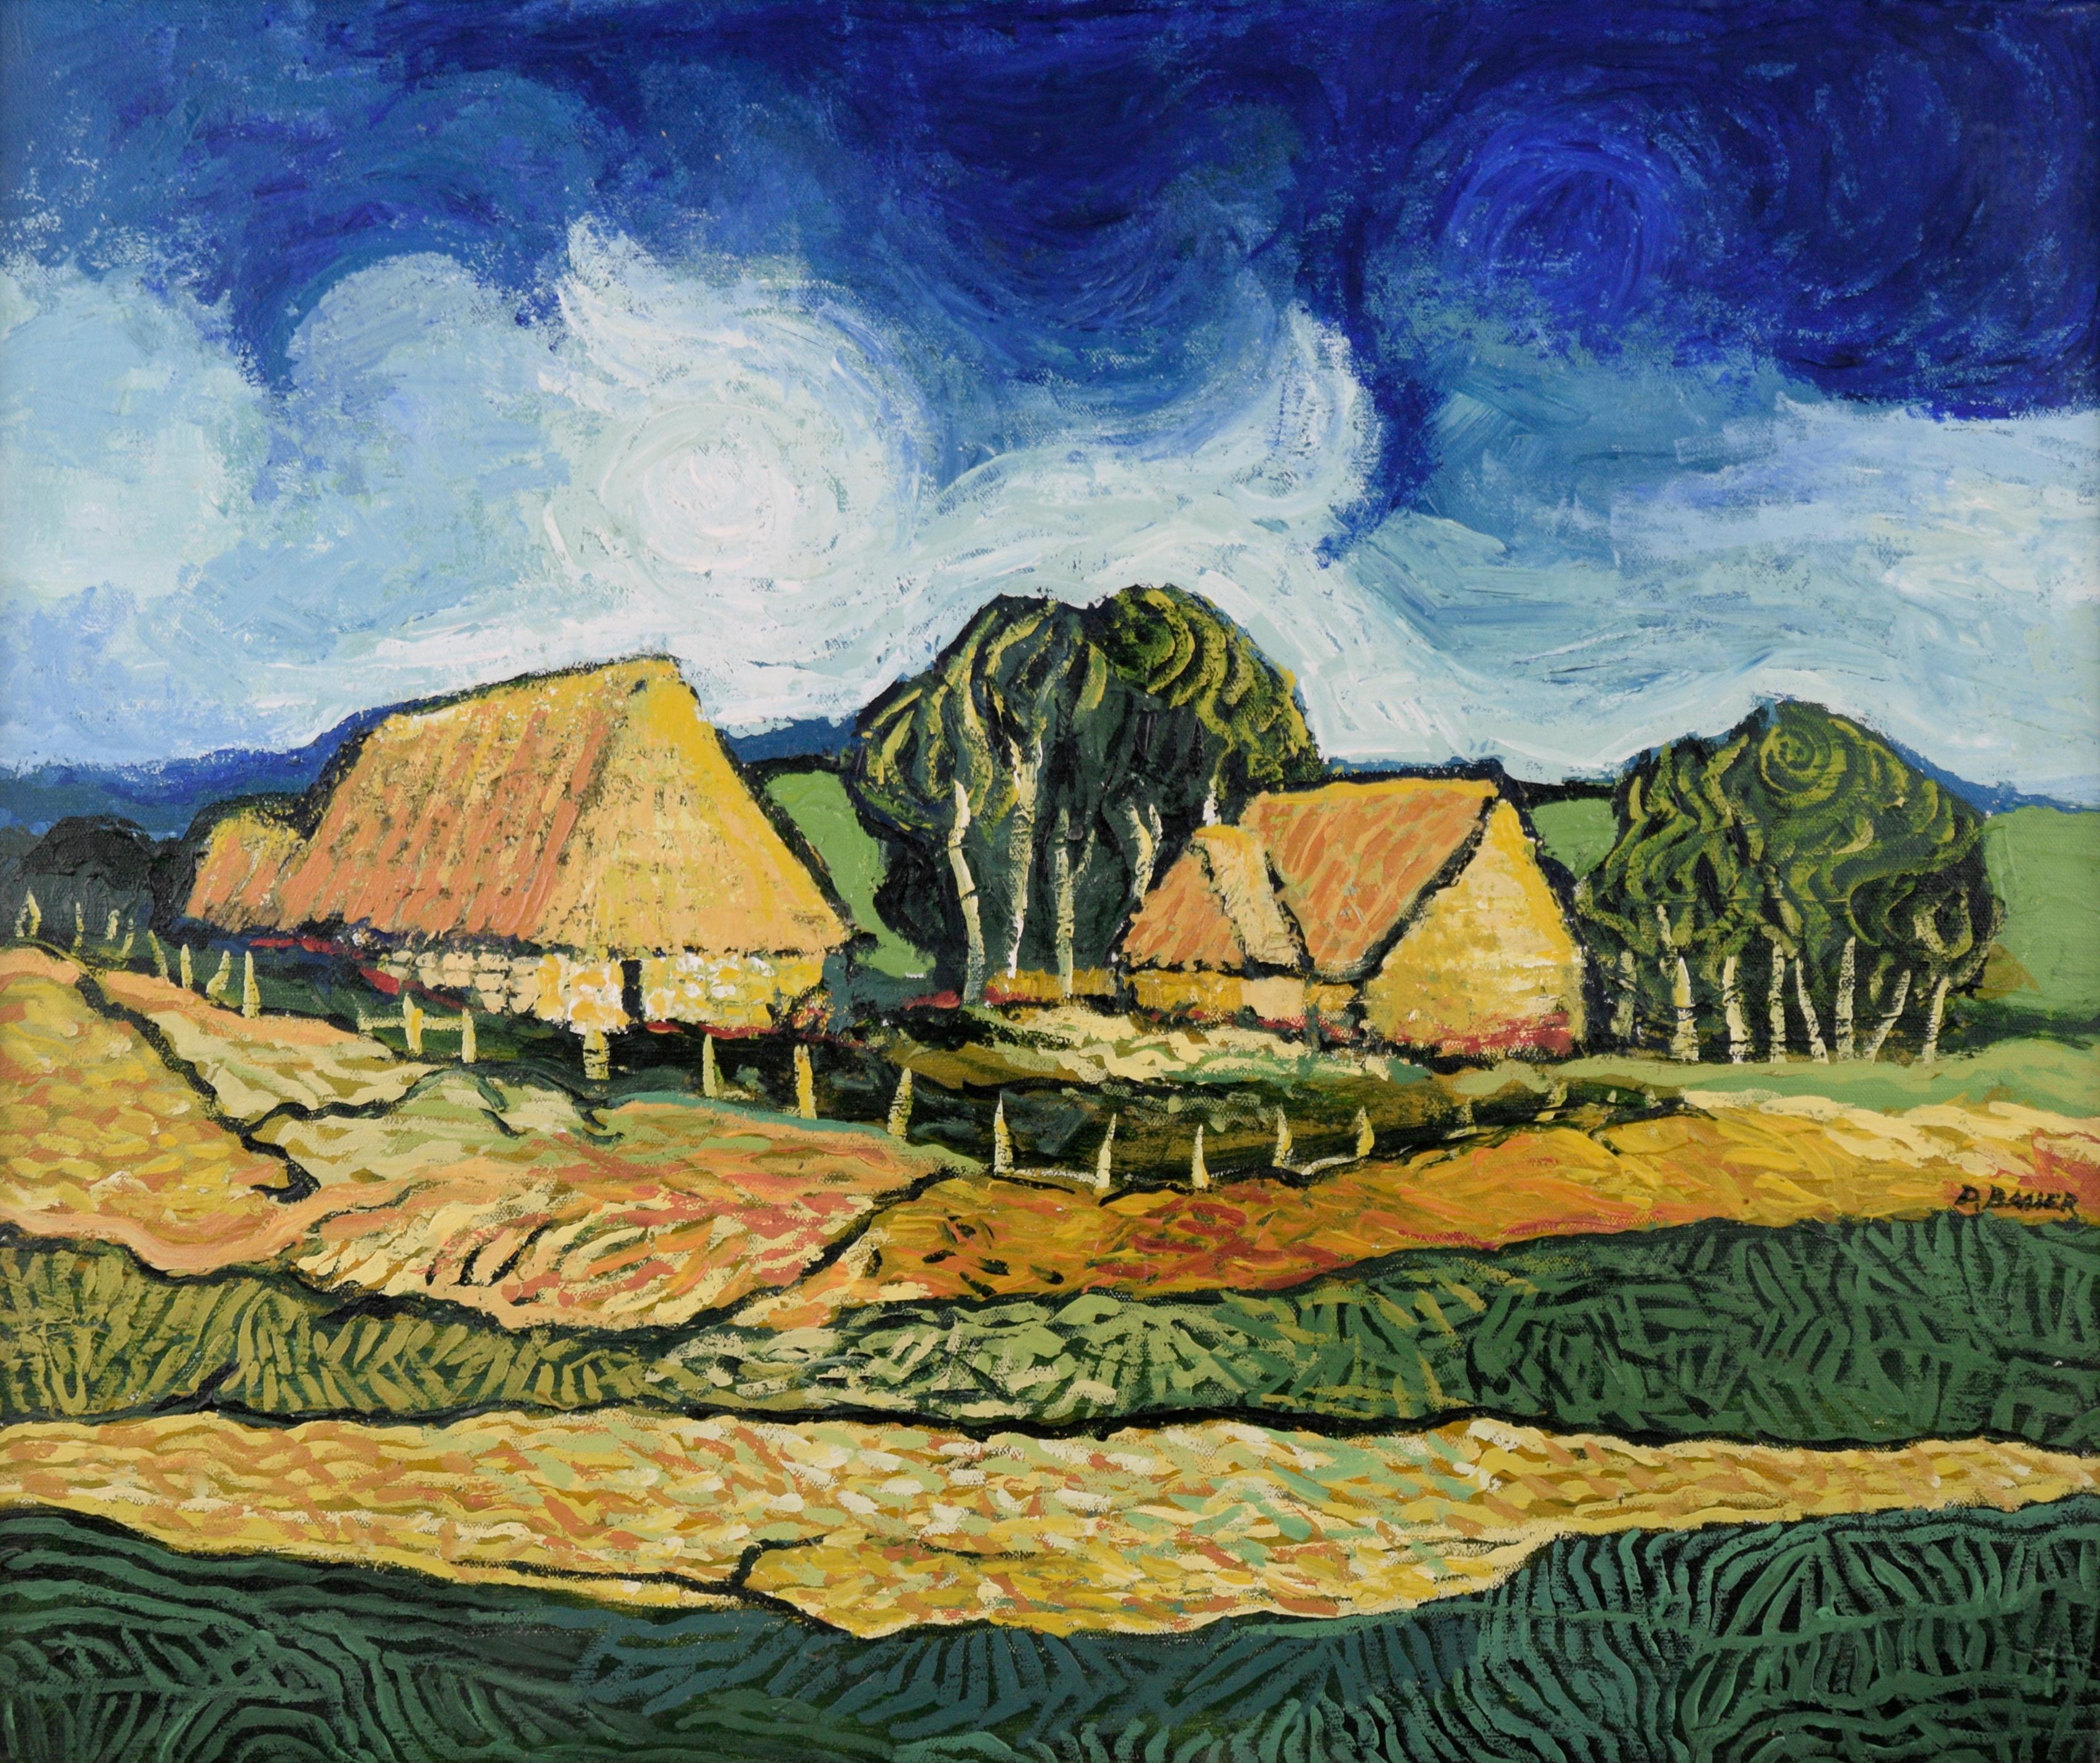 Country Homes - Landscape (in the style of Vincent van Gogh) - Painting by D Bauer 